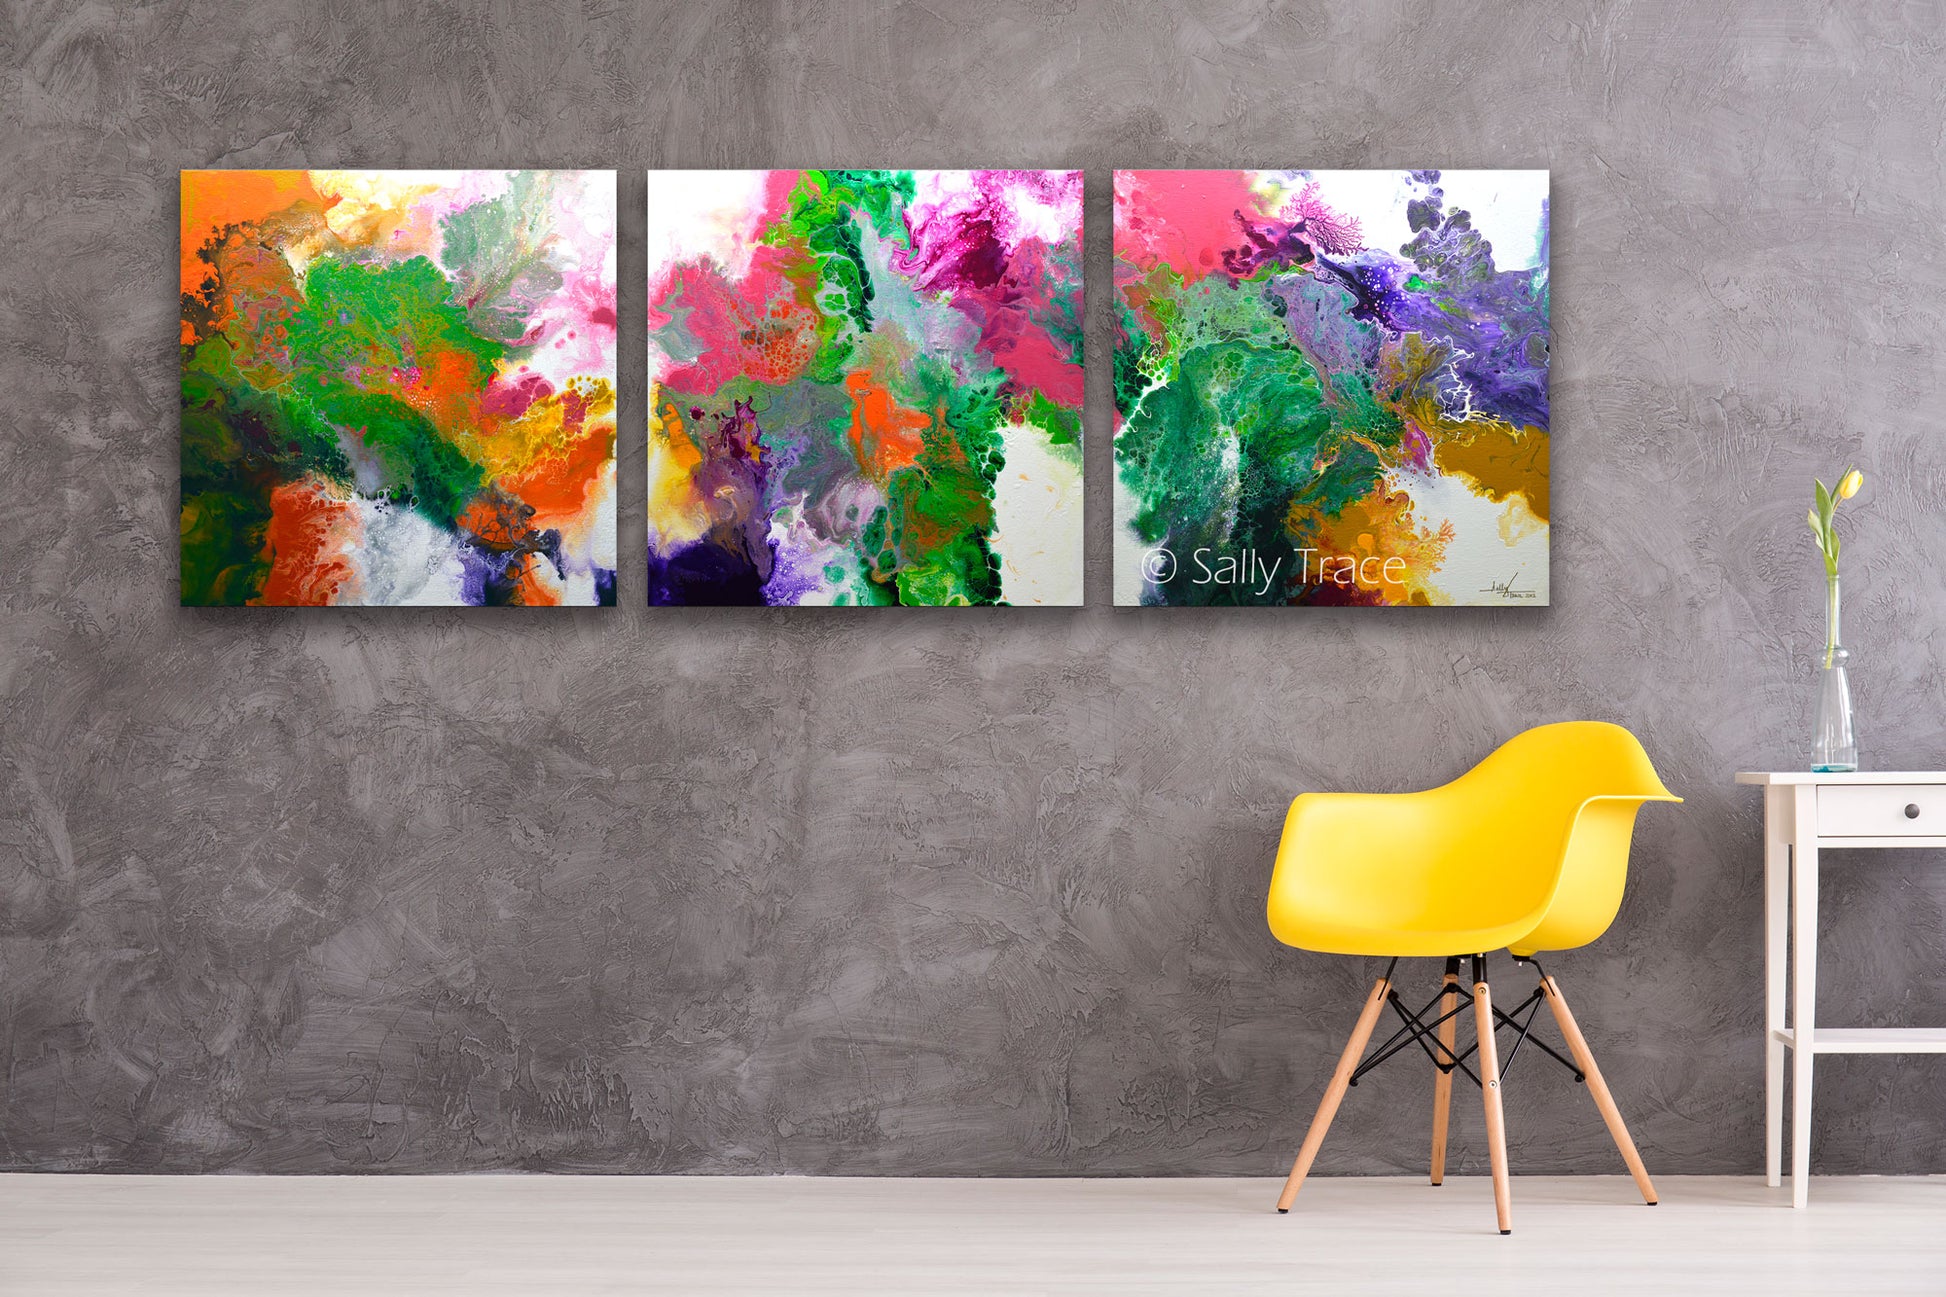 Modern contemporary abstract art for sale, Delicate, triptych fluid art giclée print set on canvas by Sally Trace